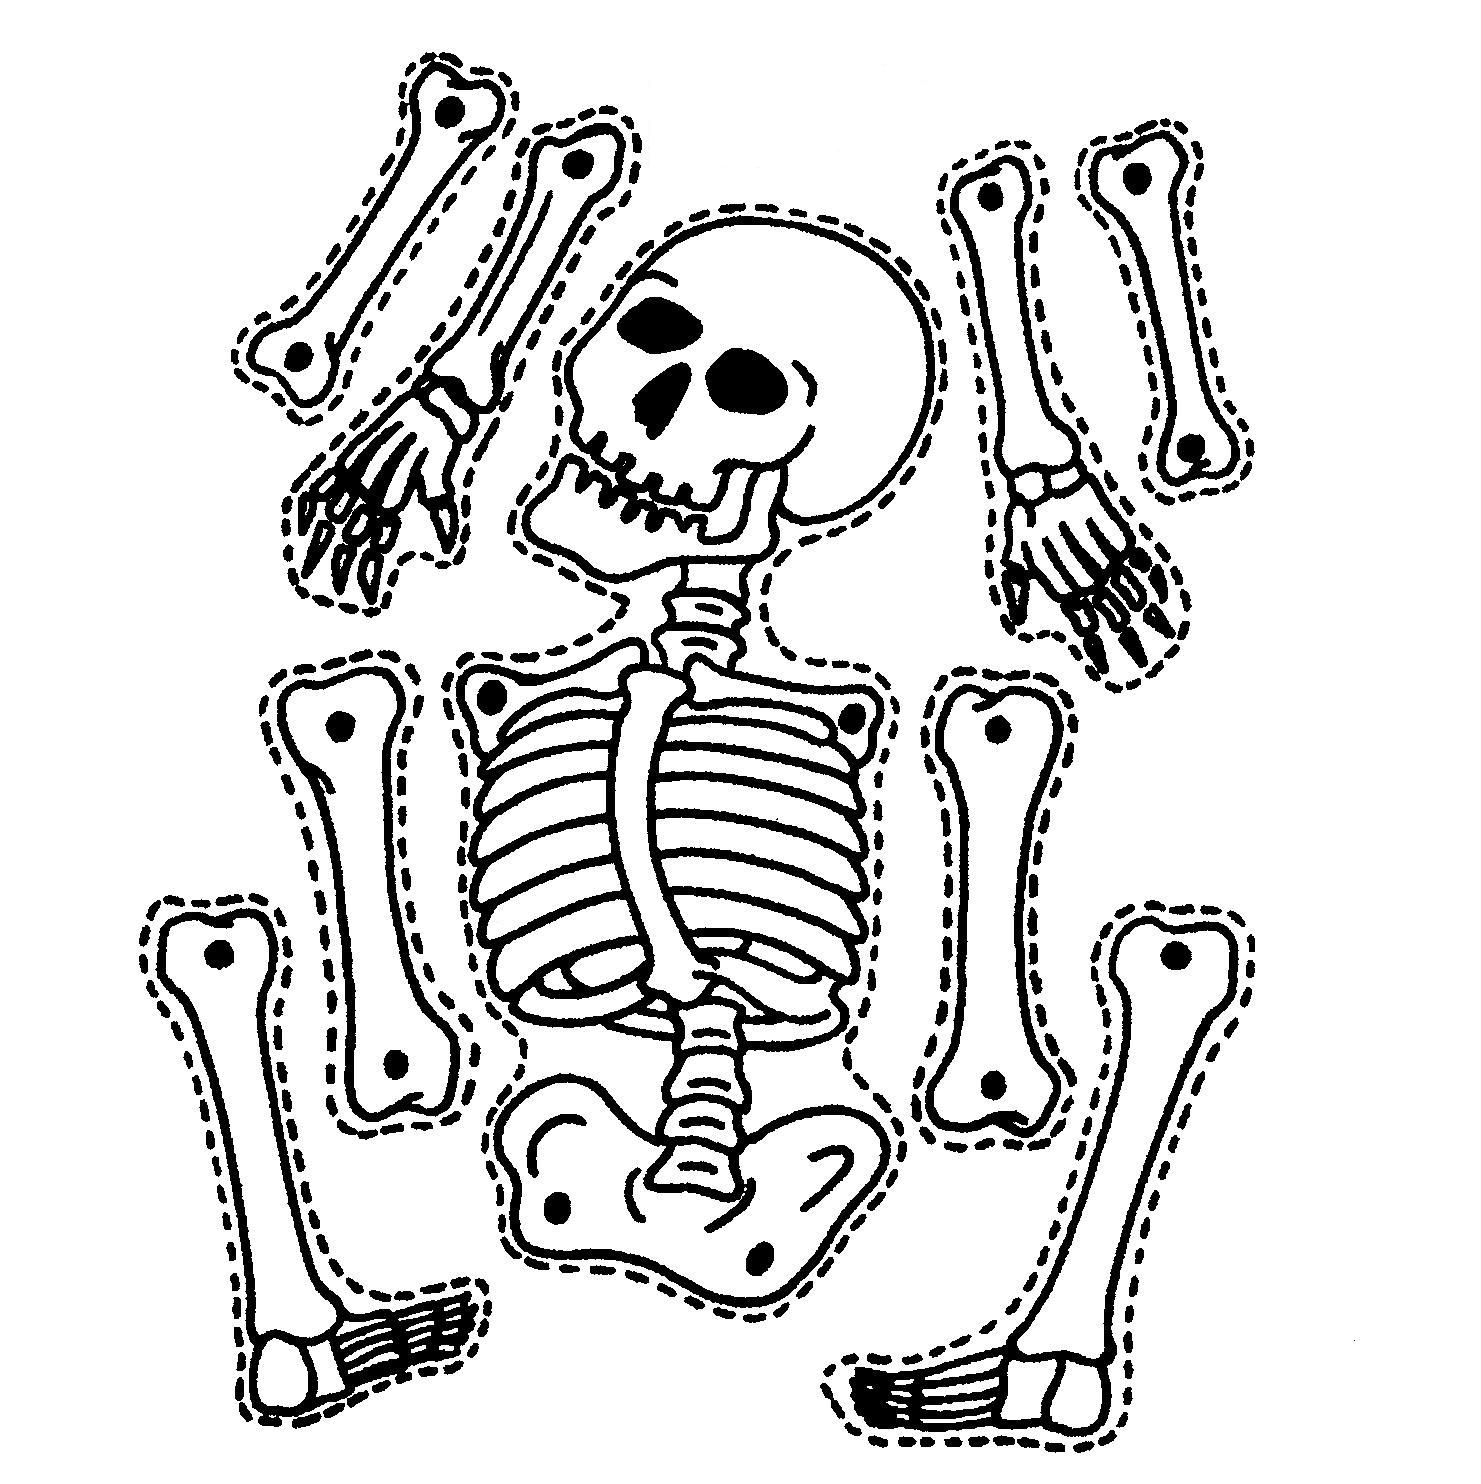 Halloween Skeleton Clipart   Clipart Panda   Free Clipart Images